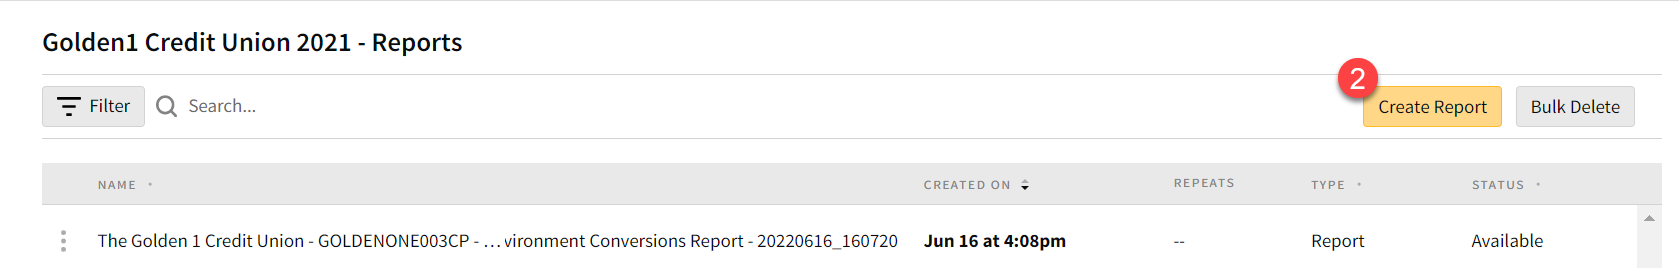 Reports page showing list of previously run reports with the Create Report button highlighted.